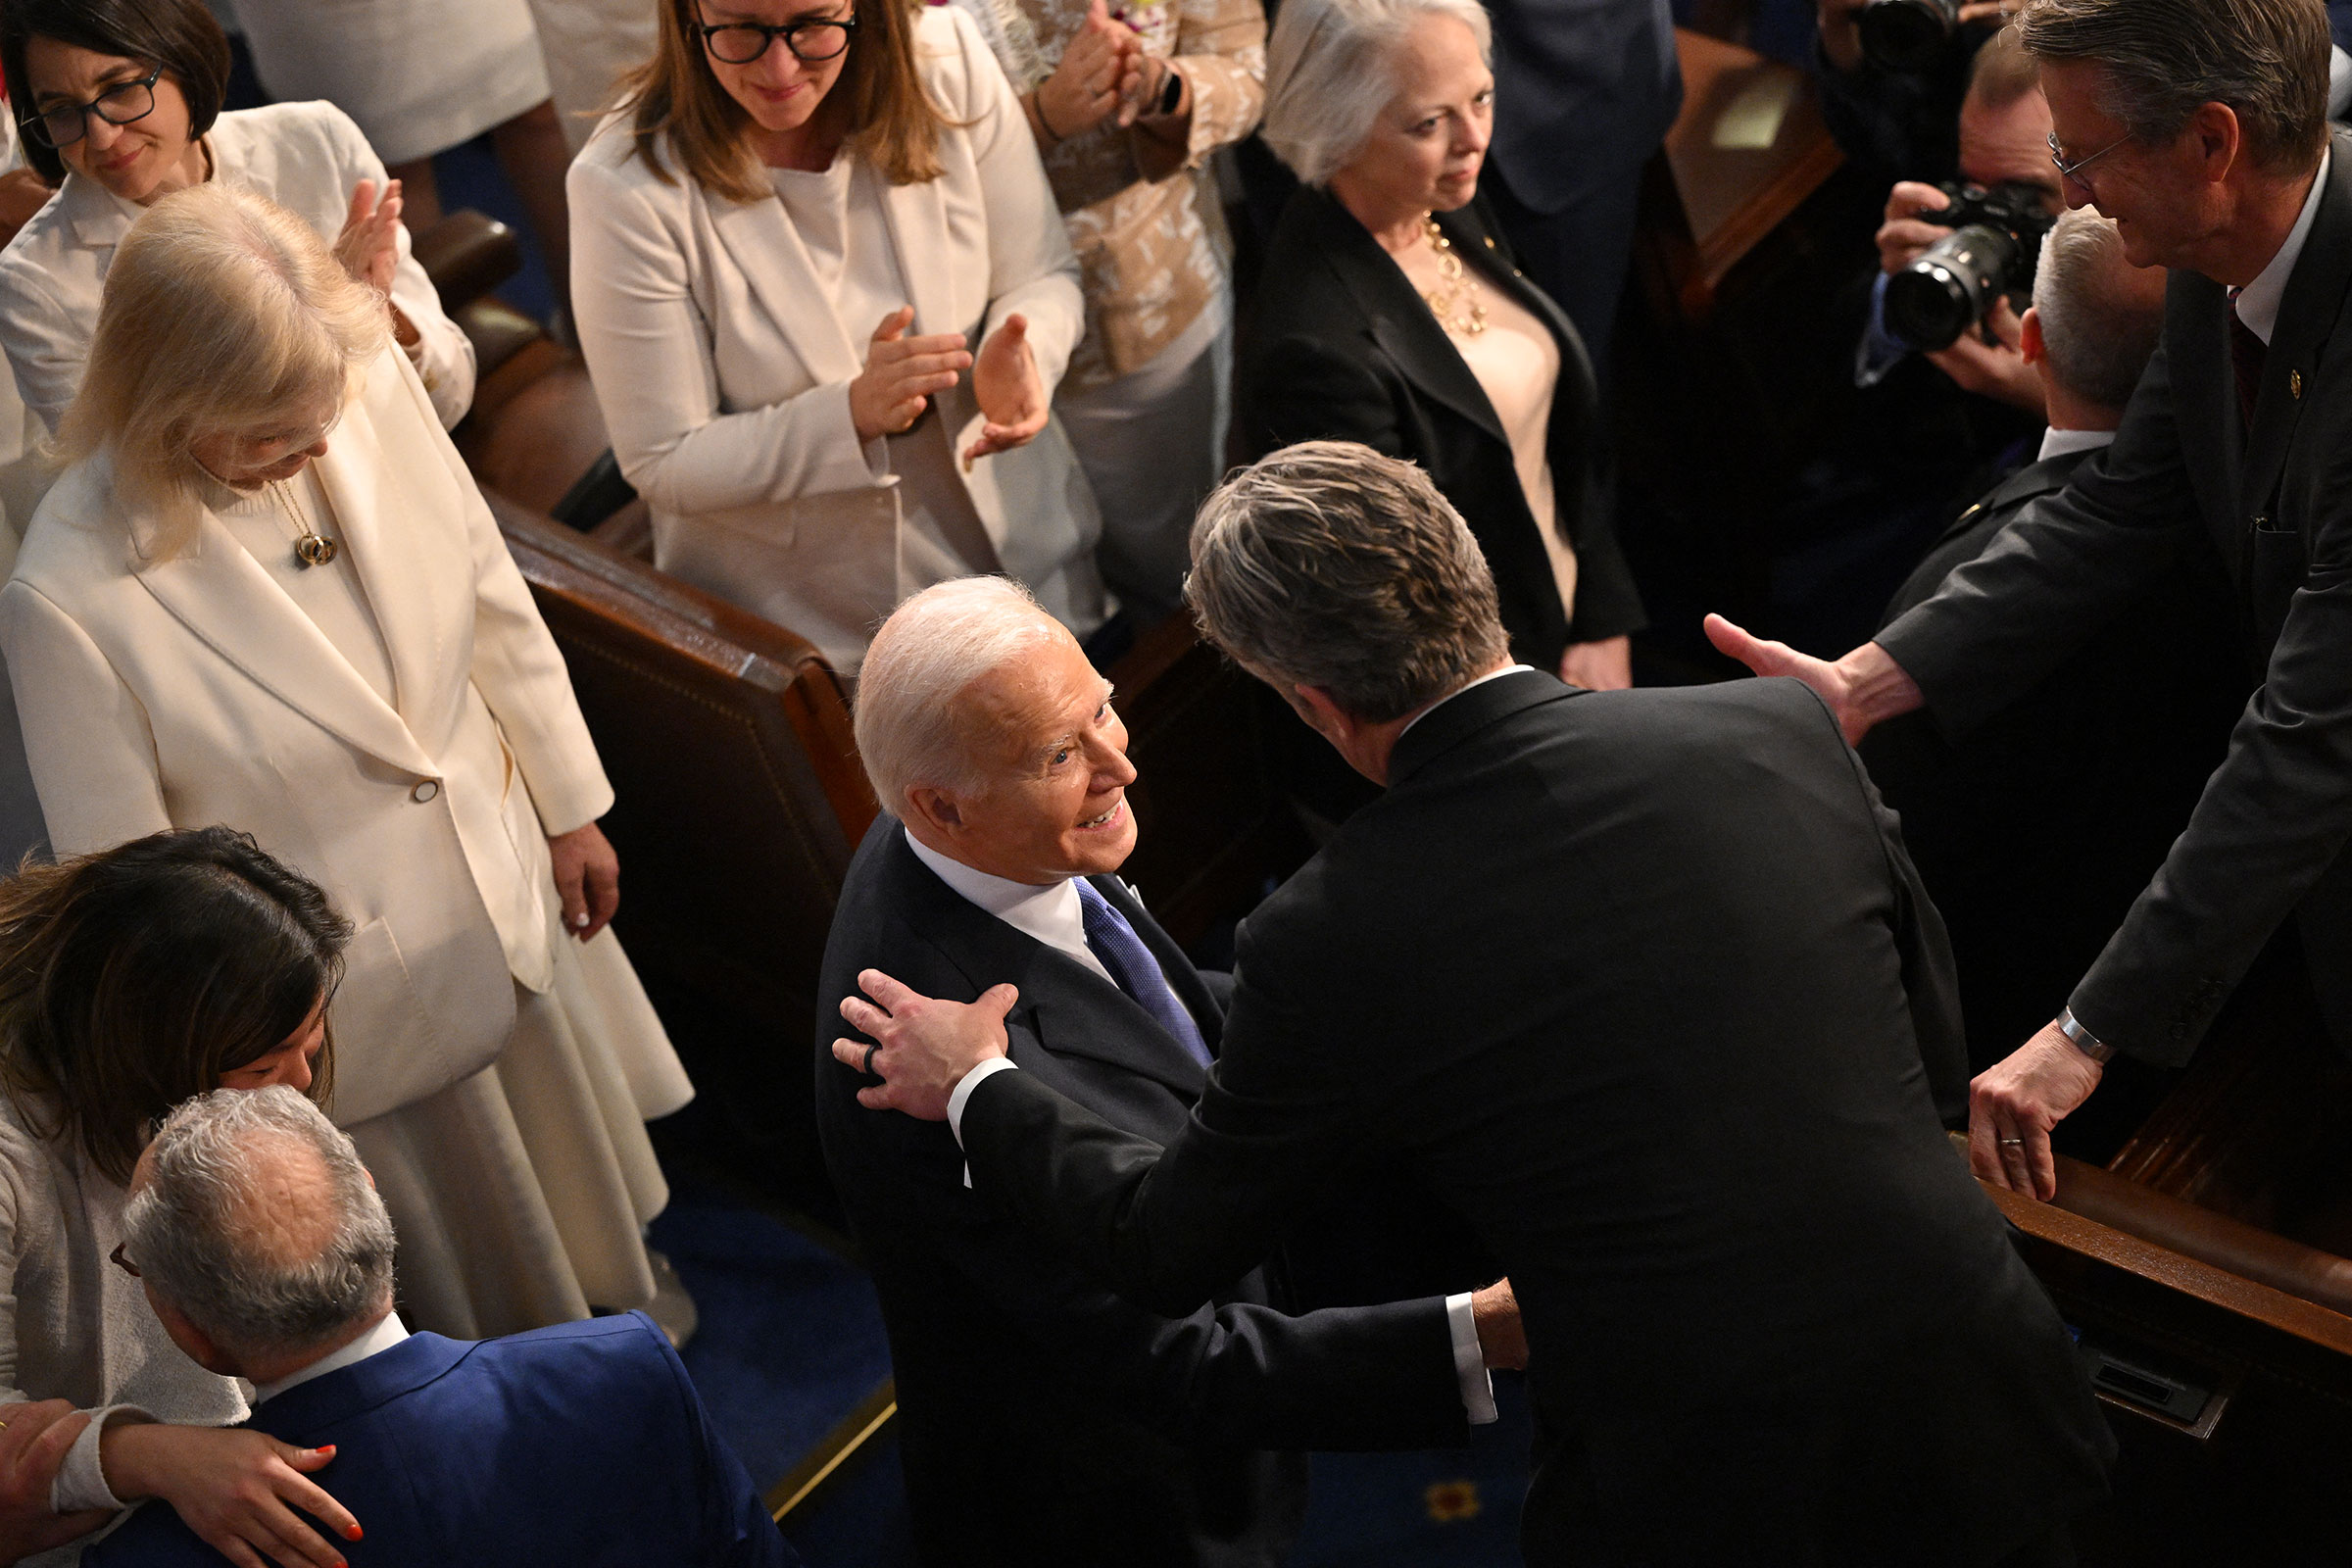 NOW Biden is delivering his State of the Union address